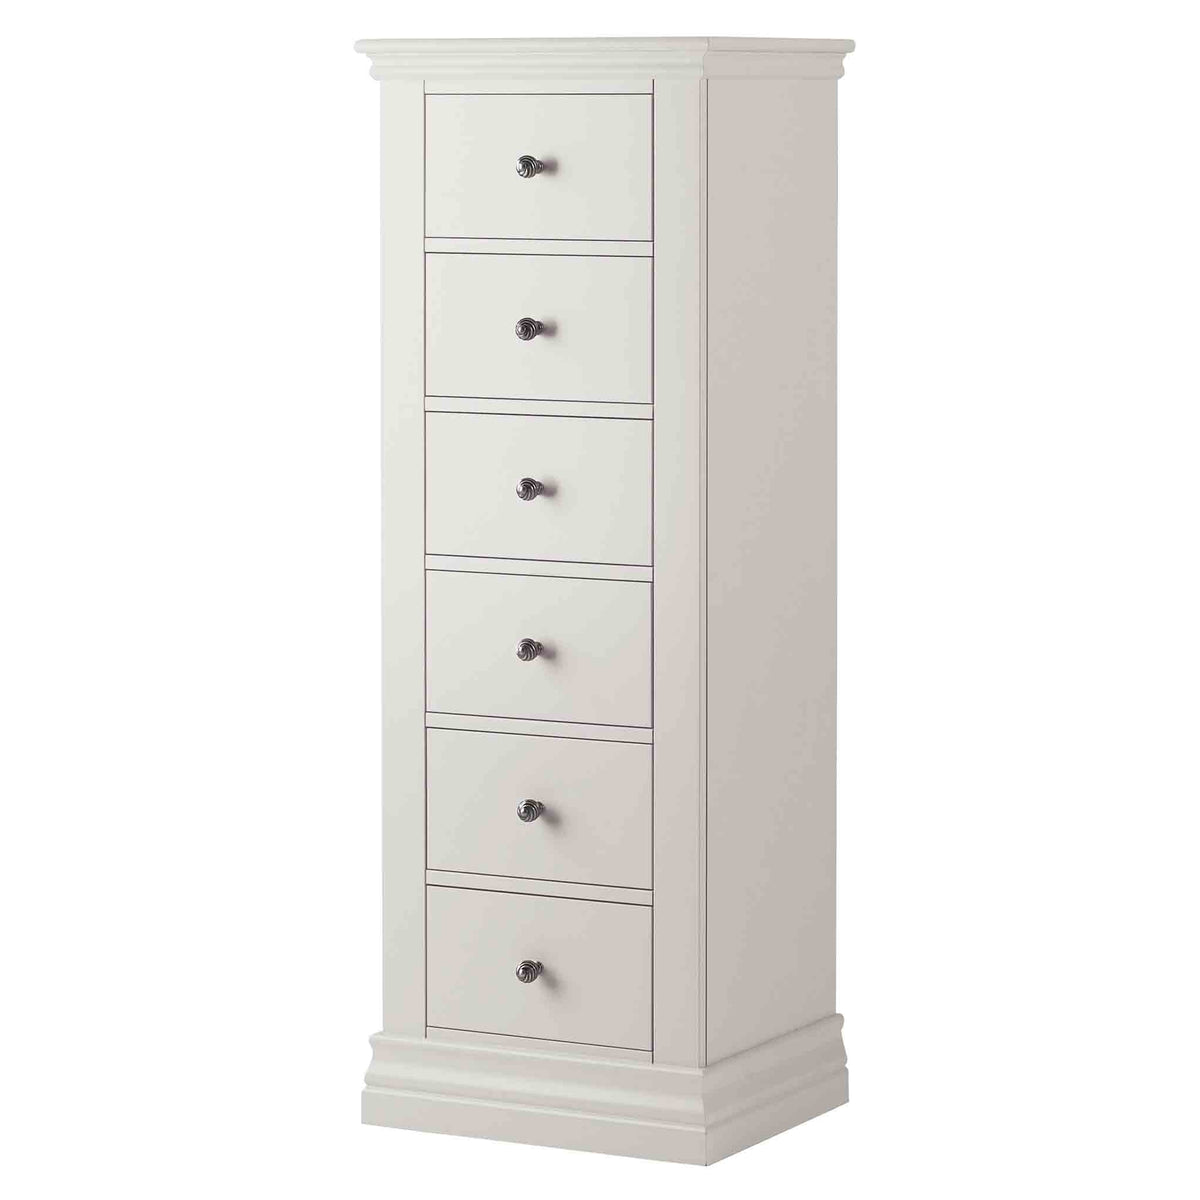 Melrose Cotton White Tallboy Chest with 6 drawers